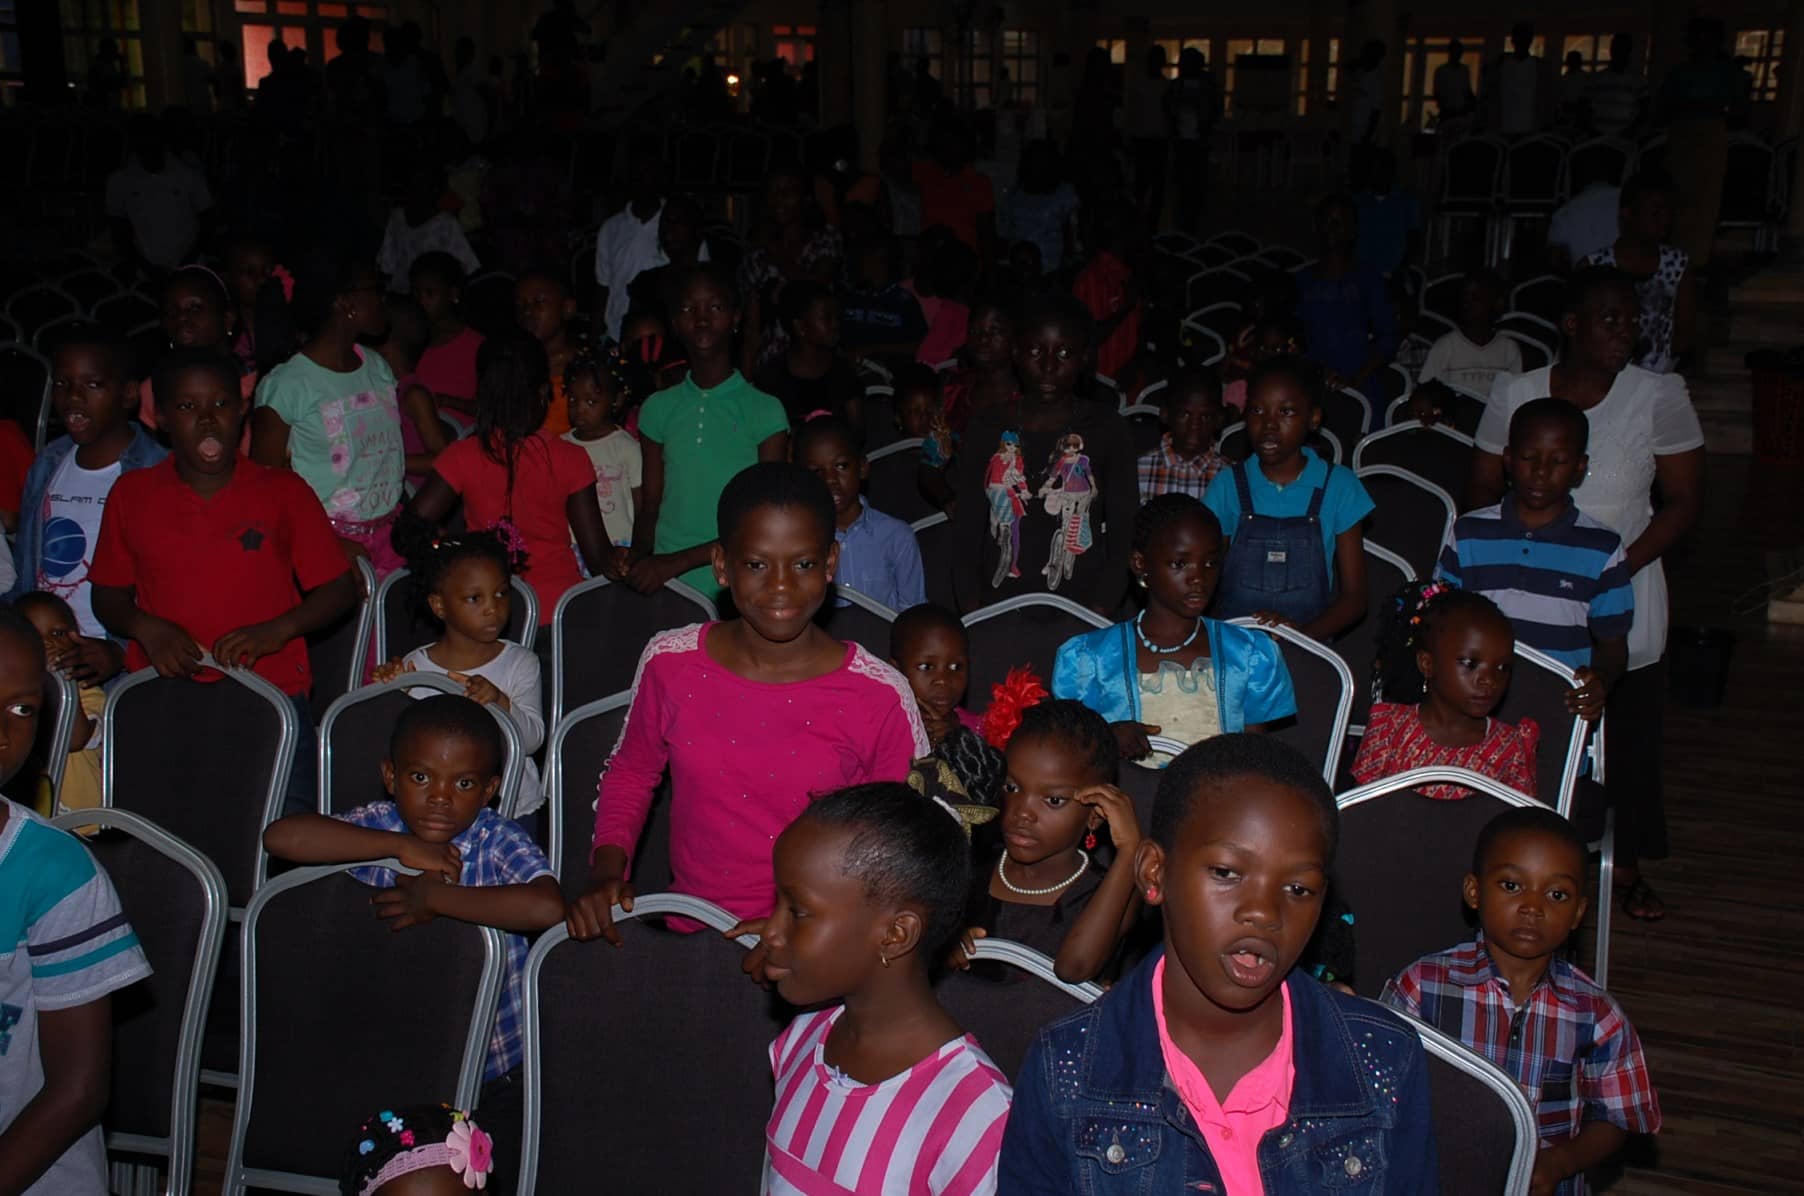 Cross section of participants at the funfair